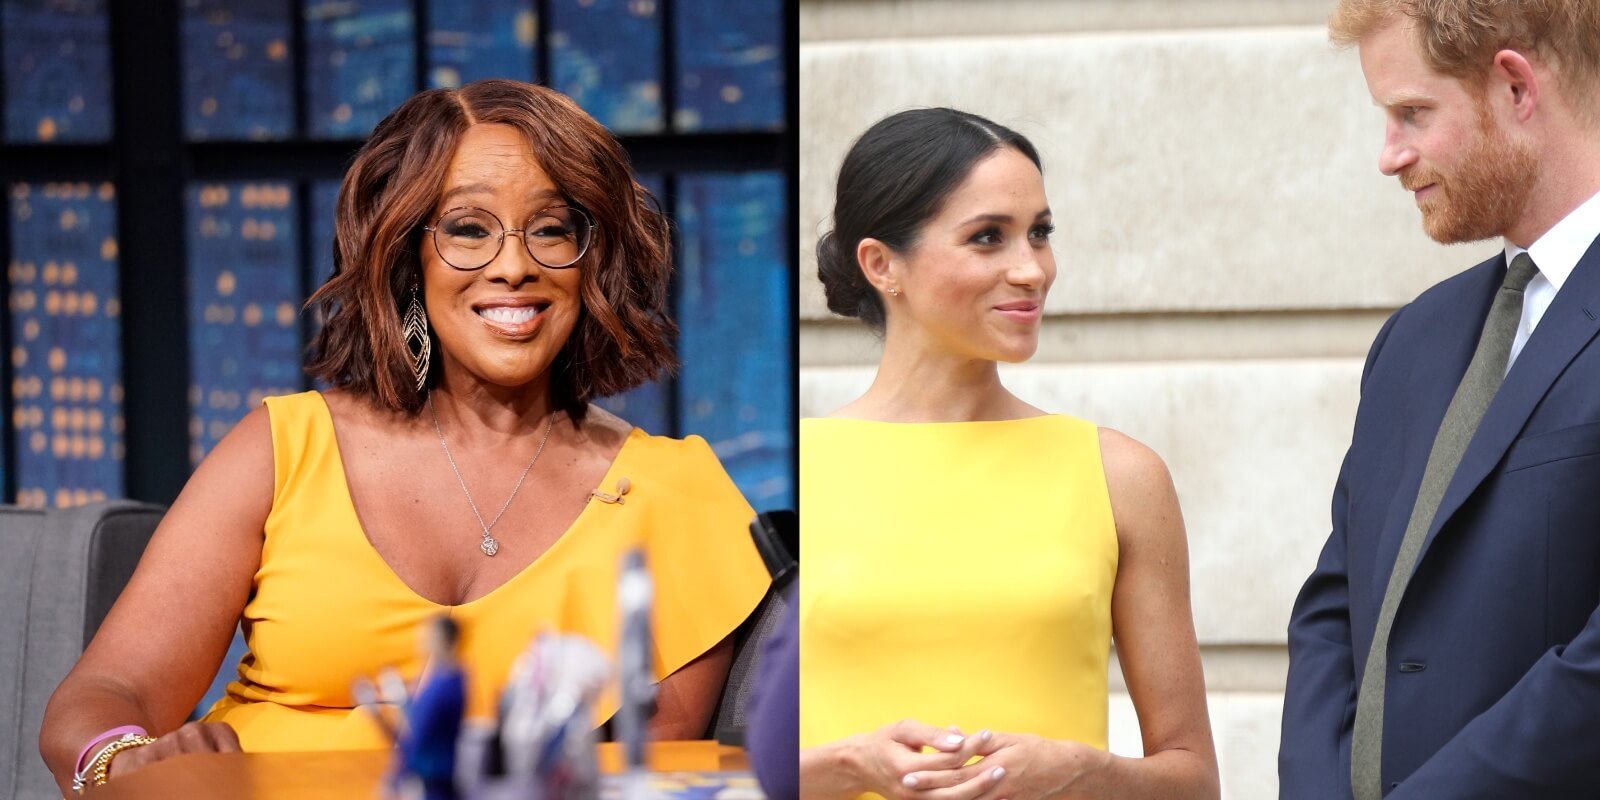 Gayle King in a side-by-side photograph with Meghan Markle and Prince Harry.